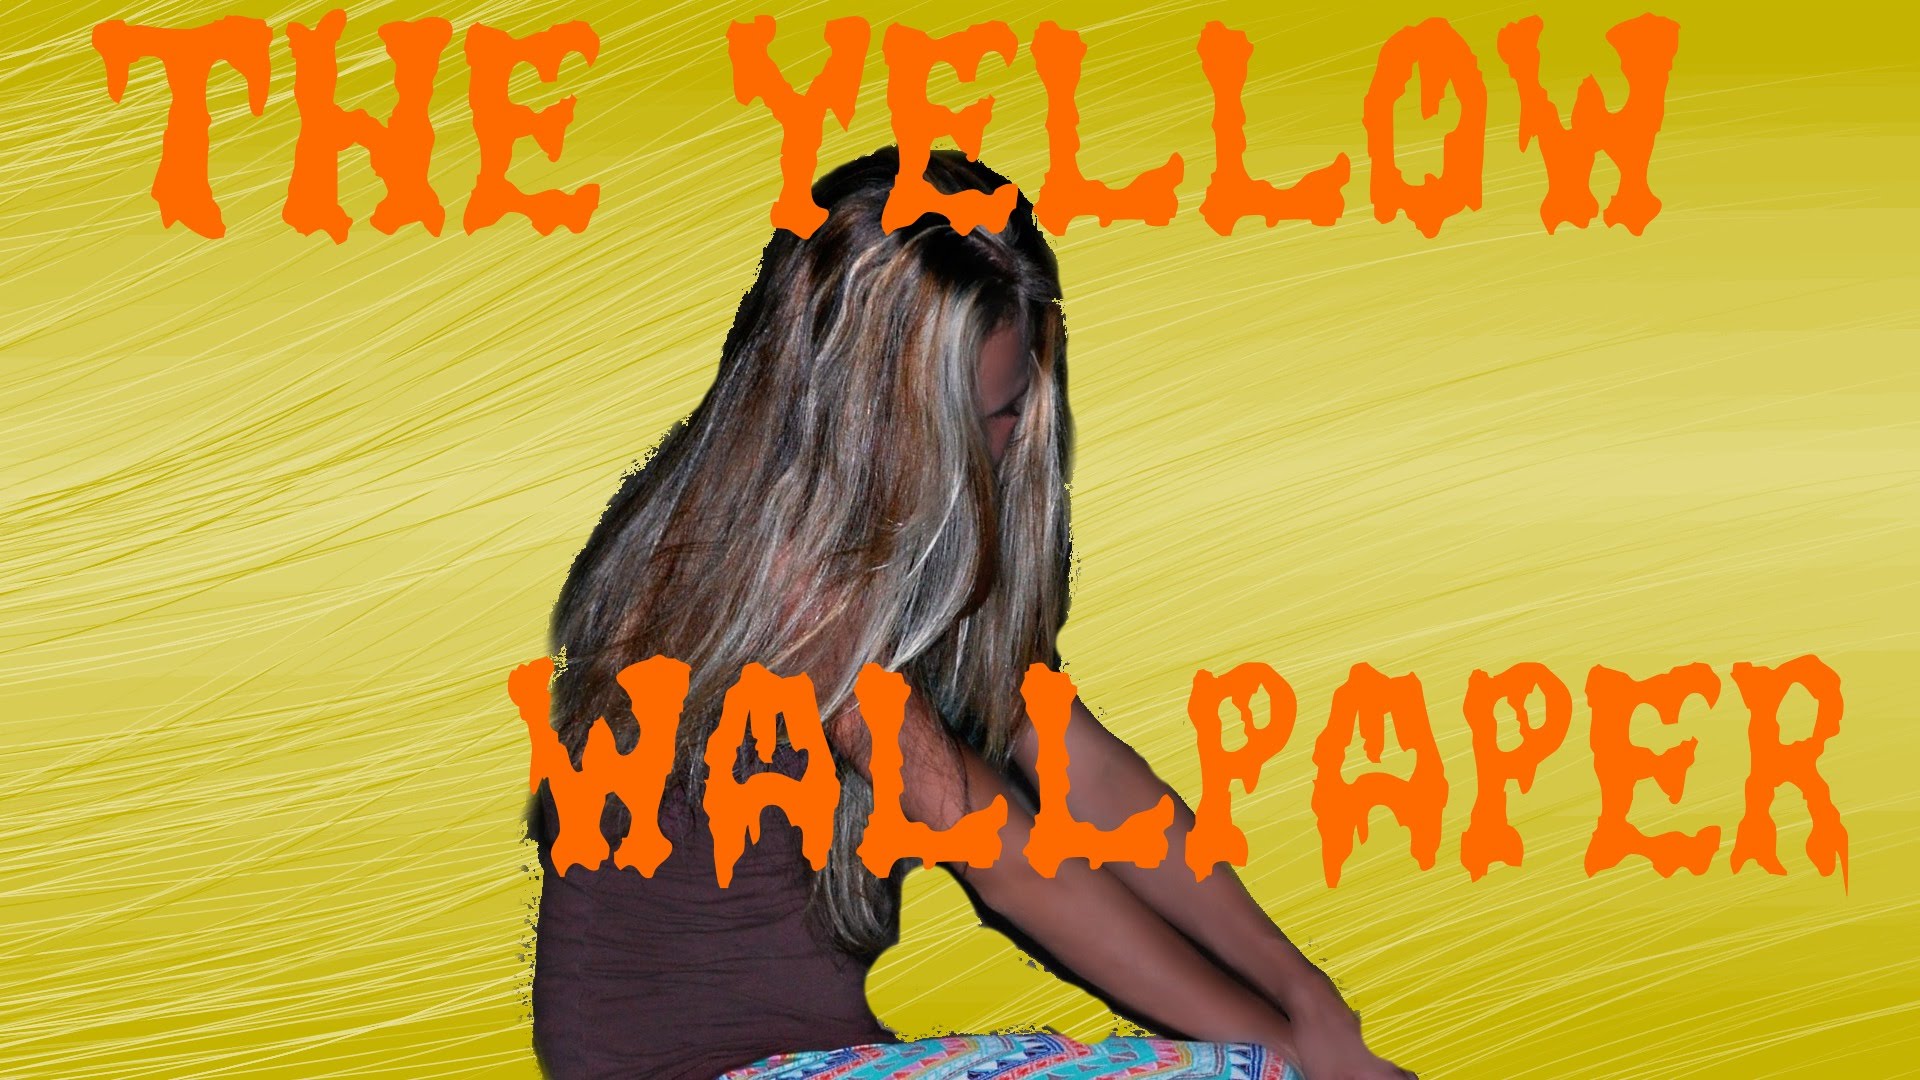 The Yellow Wallpaper by Charlotte Perkins Gilman Learn English Through  Listening Subtitle Available  YouTube